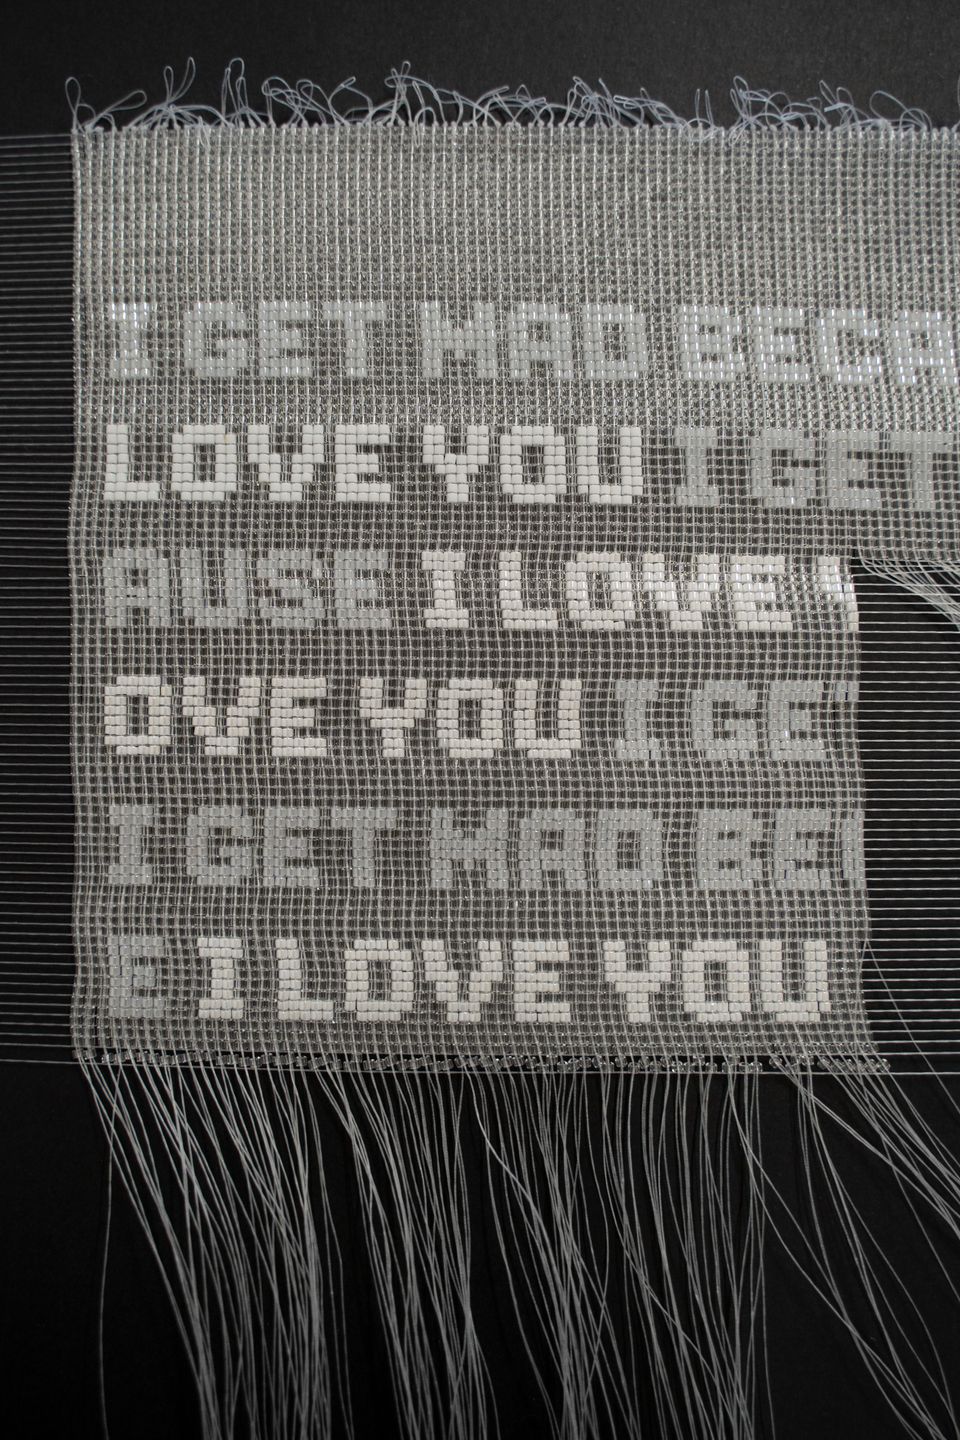 A detail of a woven artwork that is in progress. Text is written in beads. It repeats "I get mad because I love you."